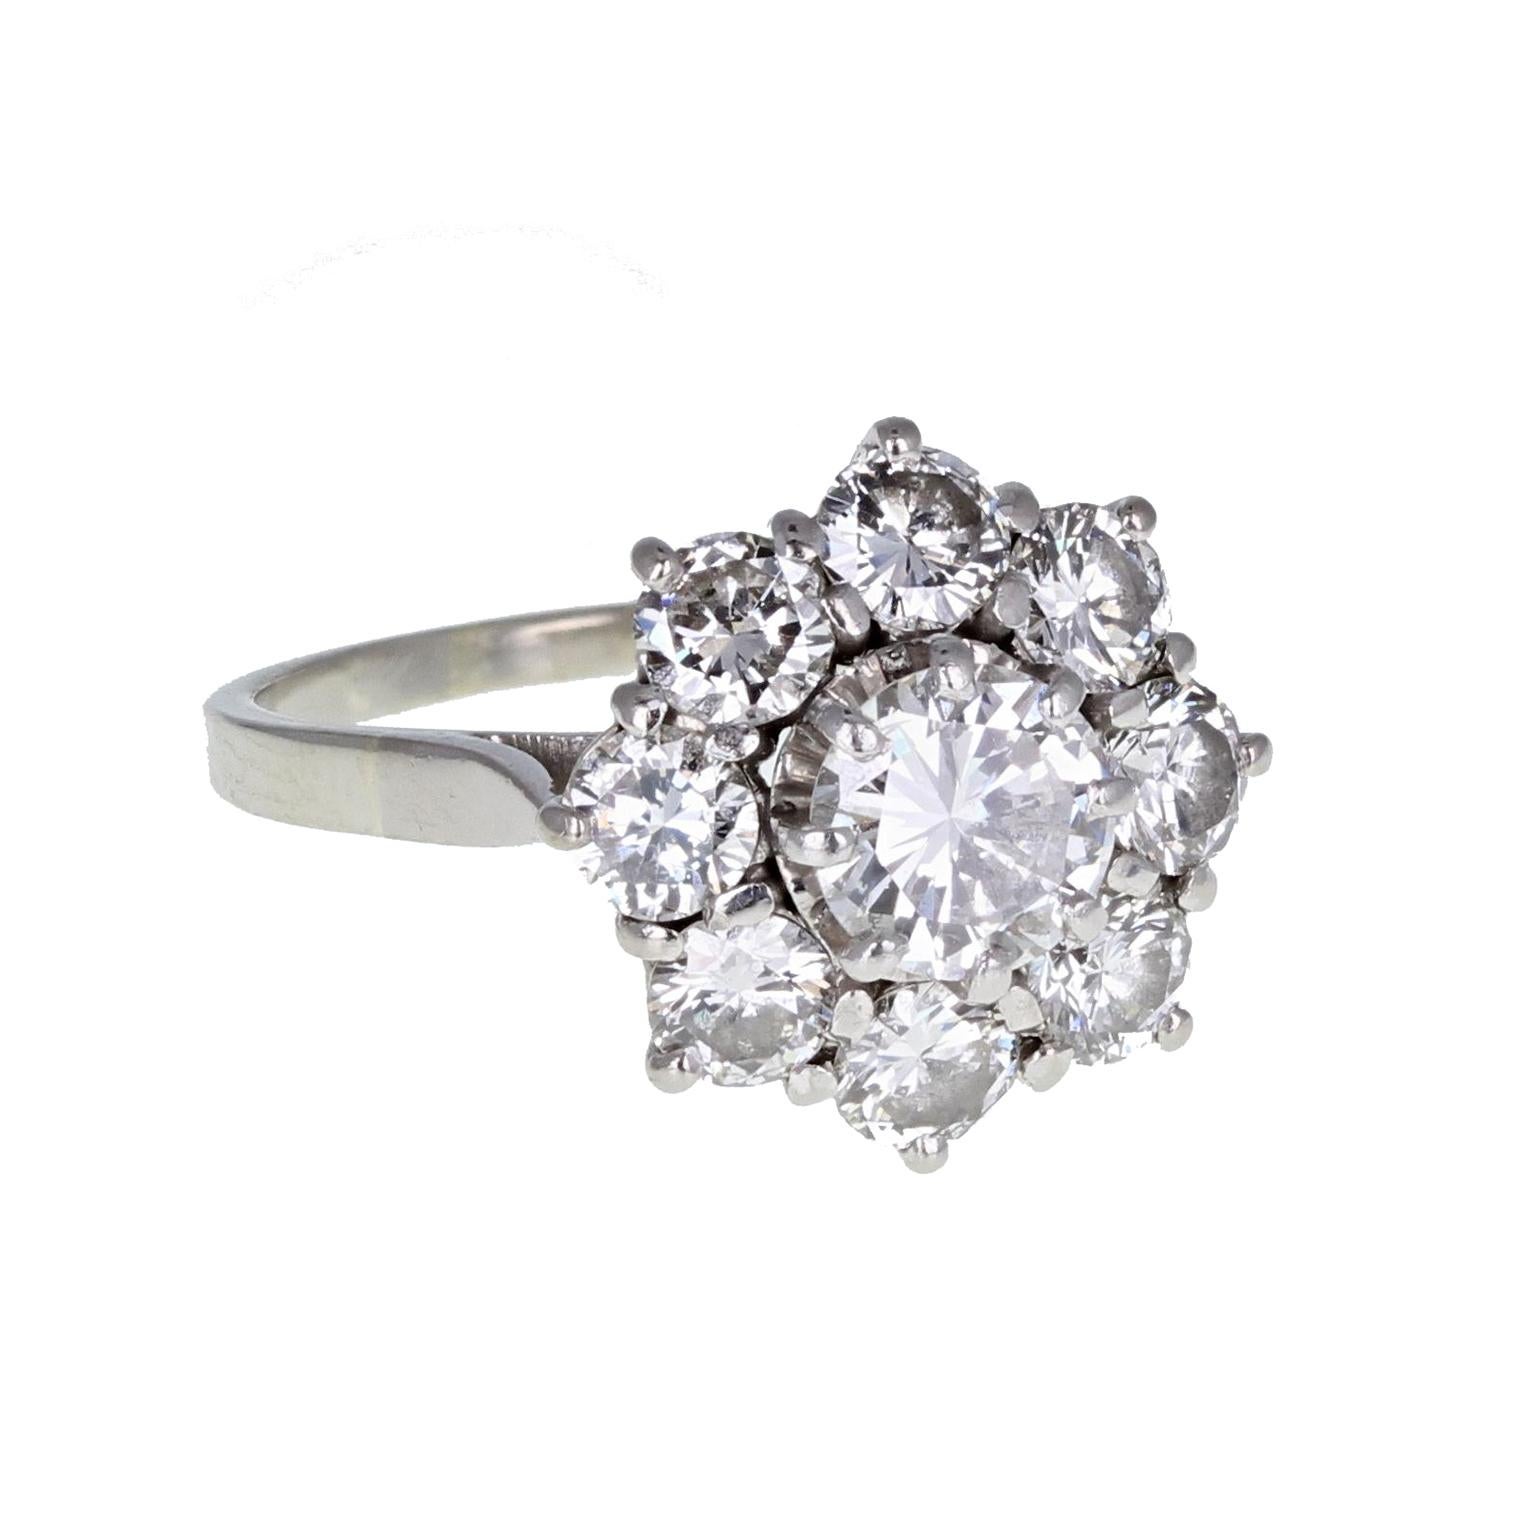 A fine and impressive 1930s diamond daisy cluster ring. french assay marks. The central brilliant-cut diamond of approximately 0.75 of a carat, mounted in platinum claws, surrounded by eight slightly smaller diamonds to form a typical daisy-shaped